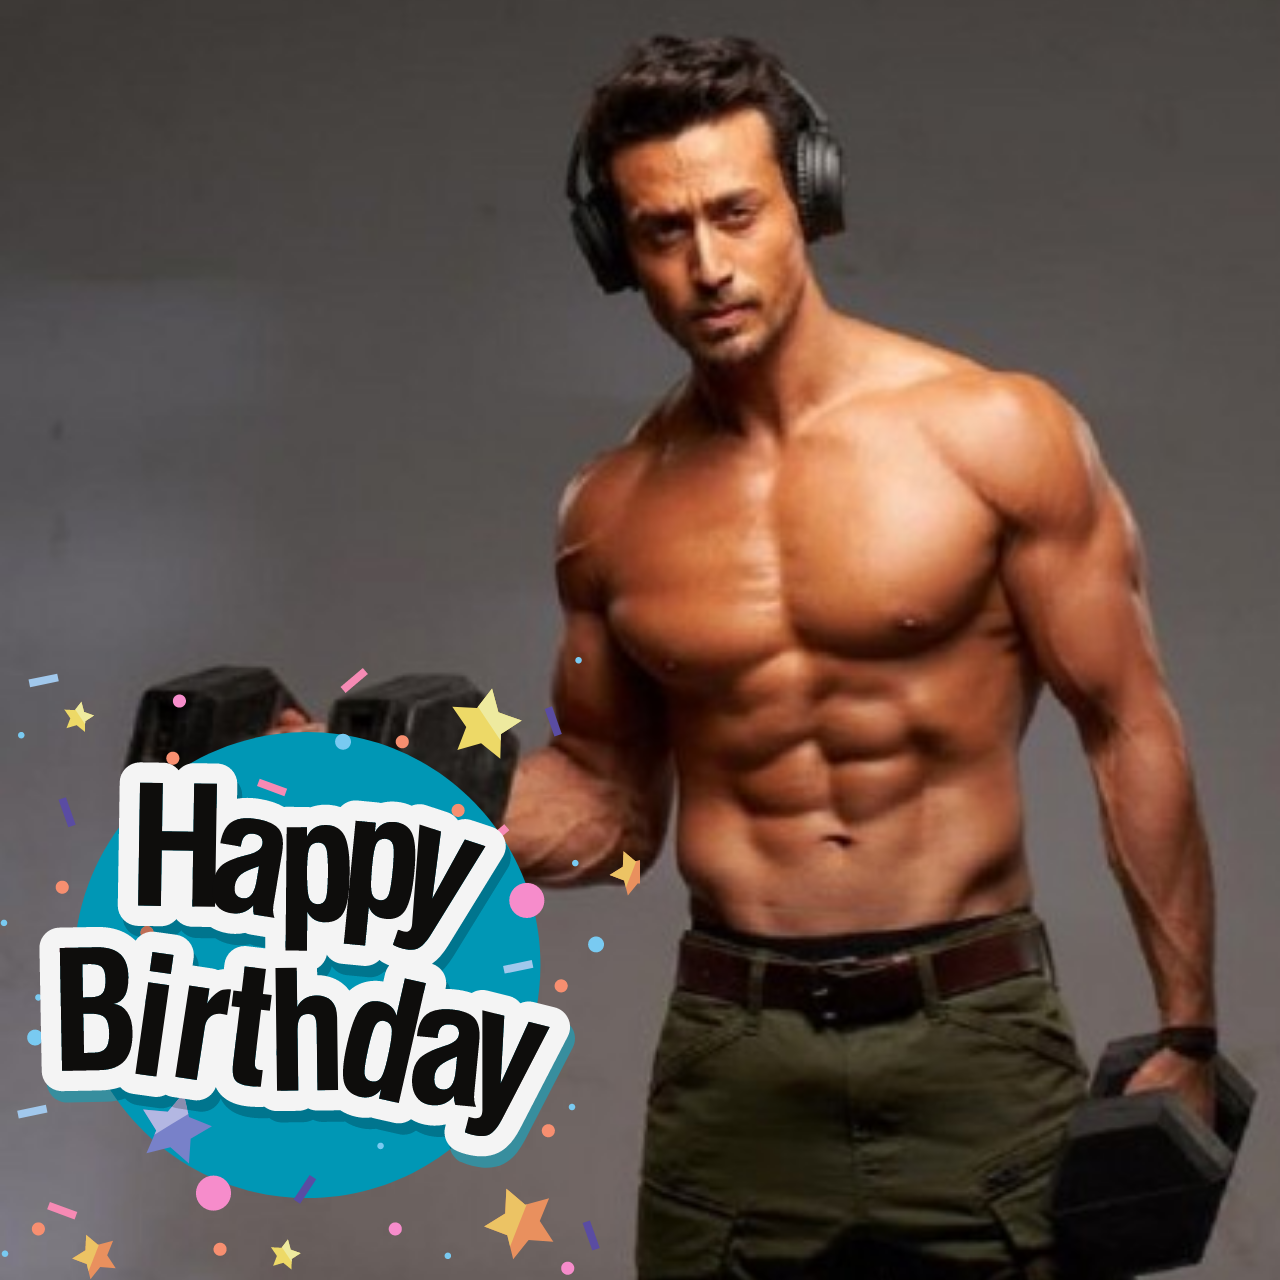 Happy Birthday Tiger Shroff: Wishes, HD Images, Messages, Greetings, Quotes to greet the Tiger of Bollywood